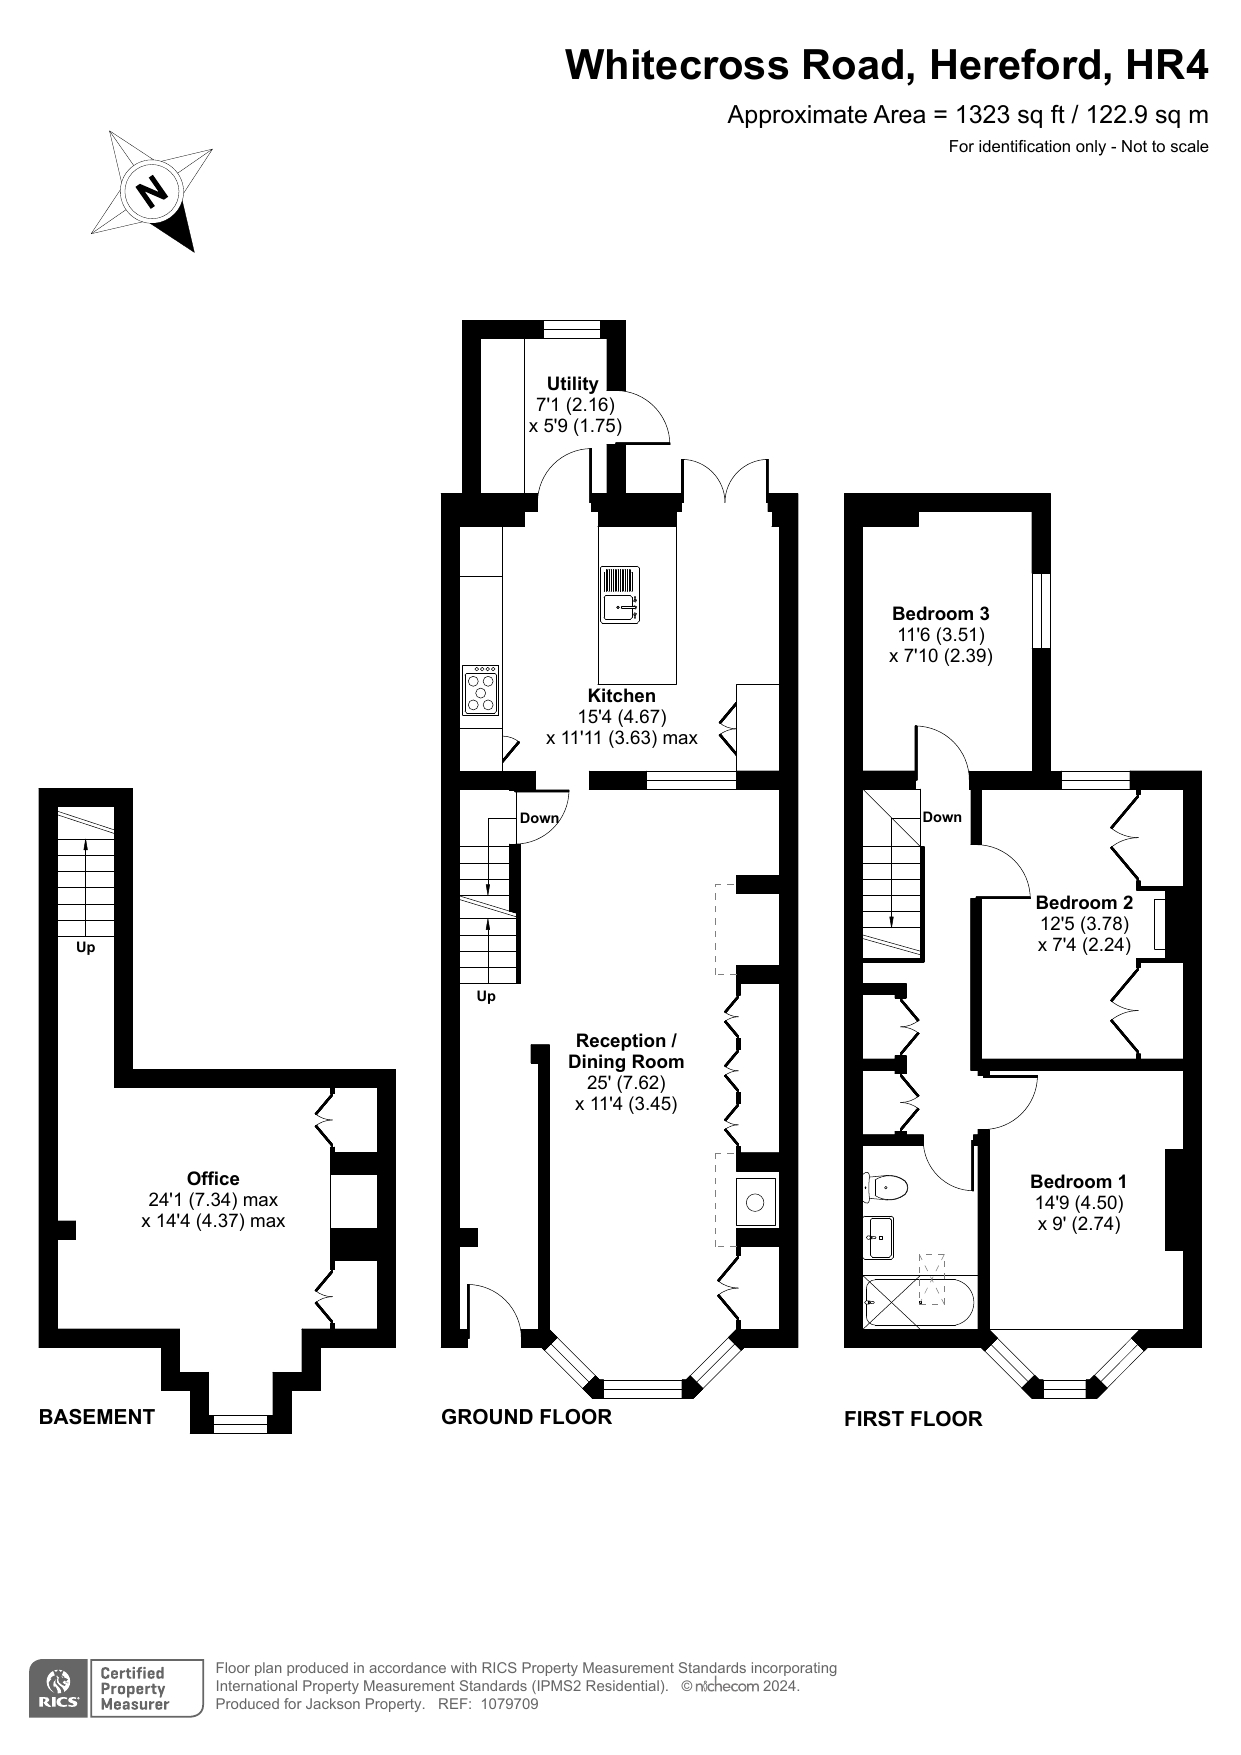 3 bed semi-detached house for sale in Whitecross Road, Hereford - Property floorplan